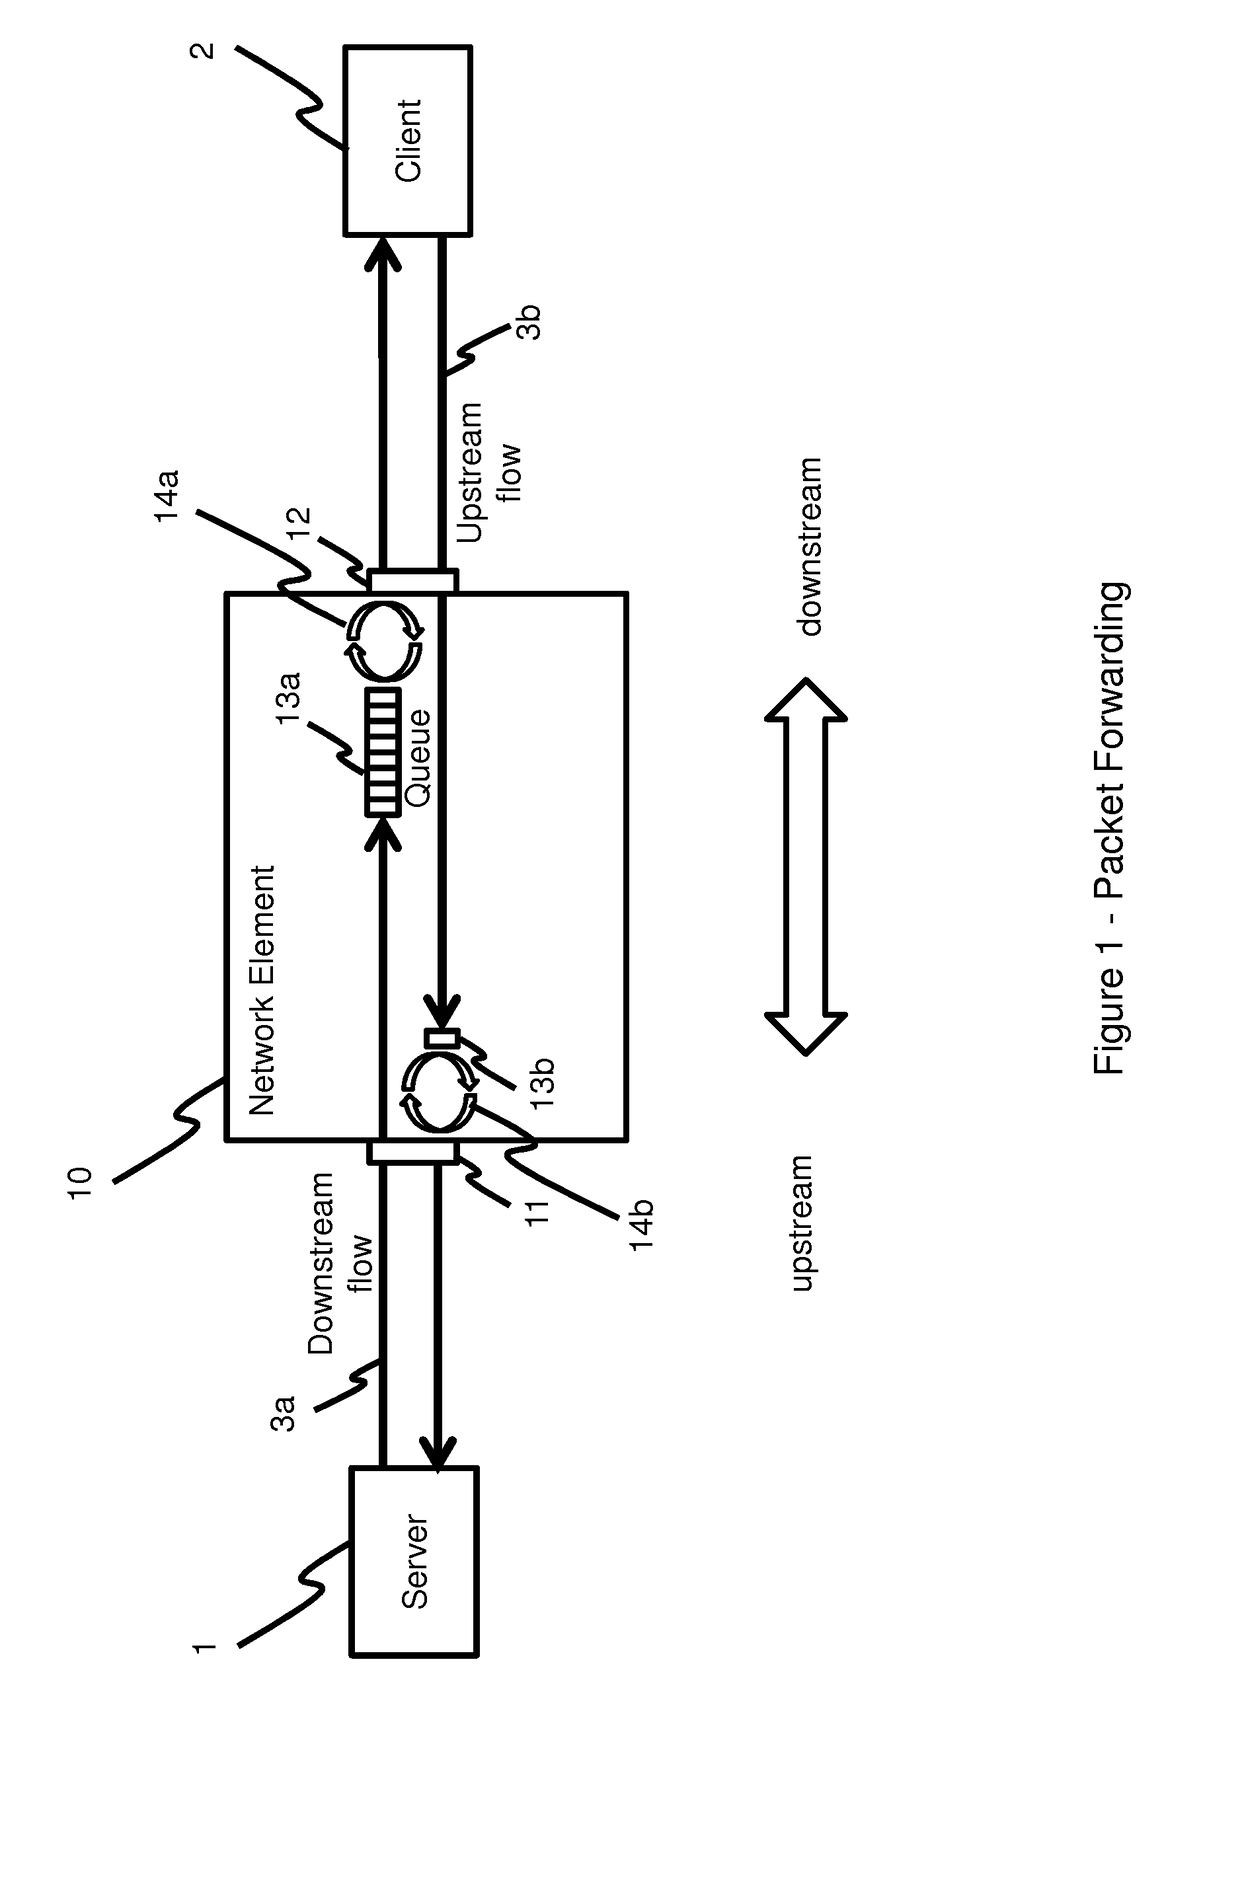 Processing data items in a communications network